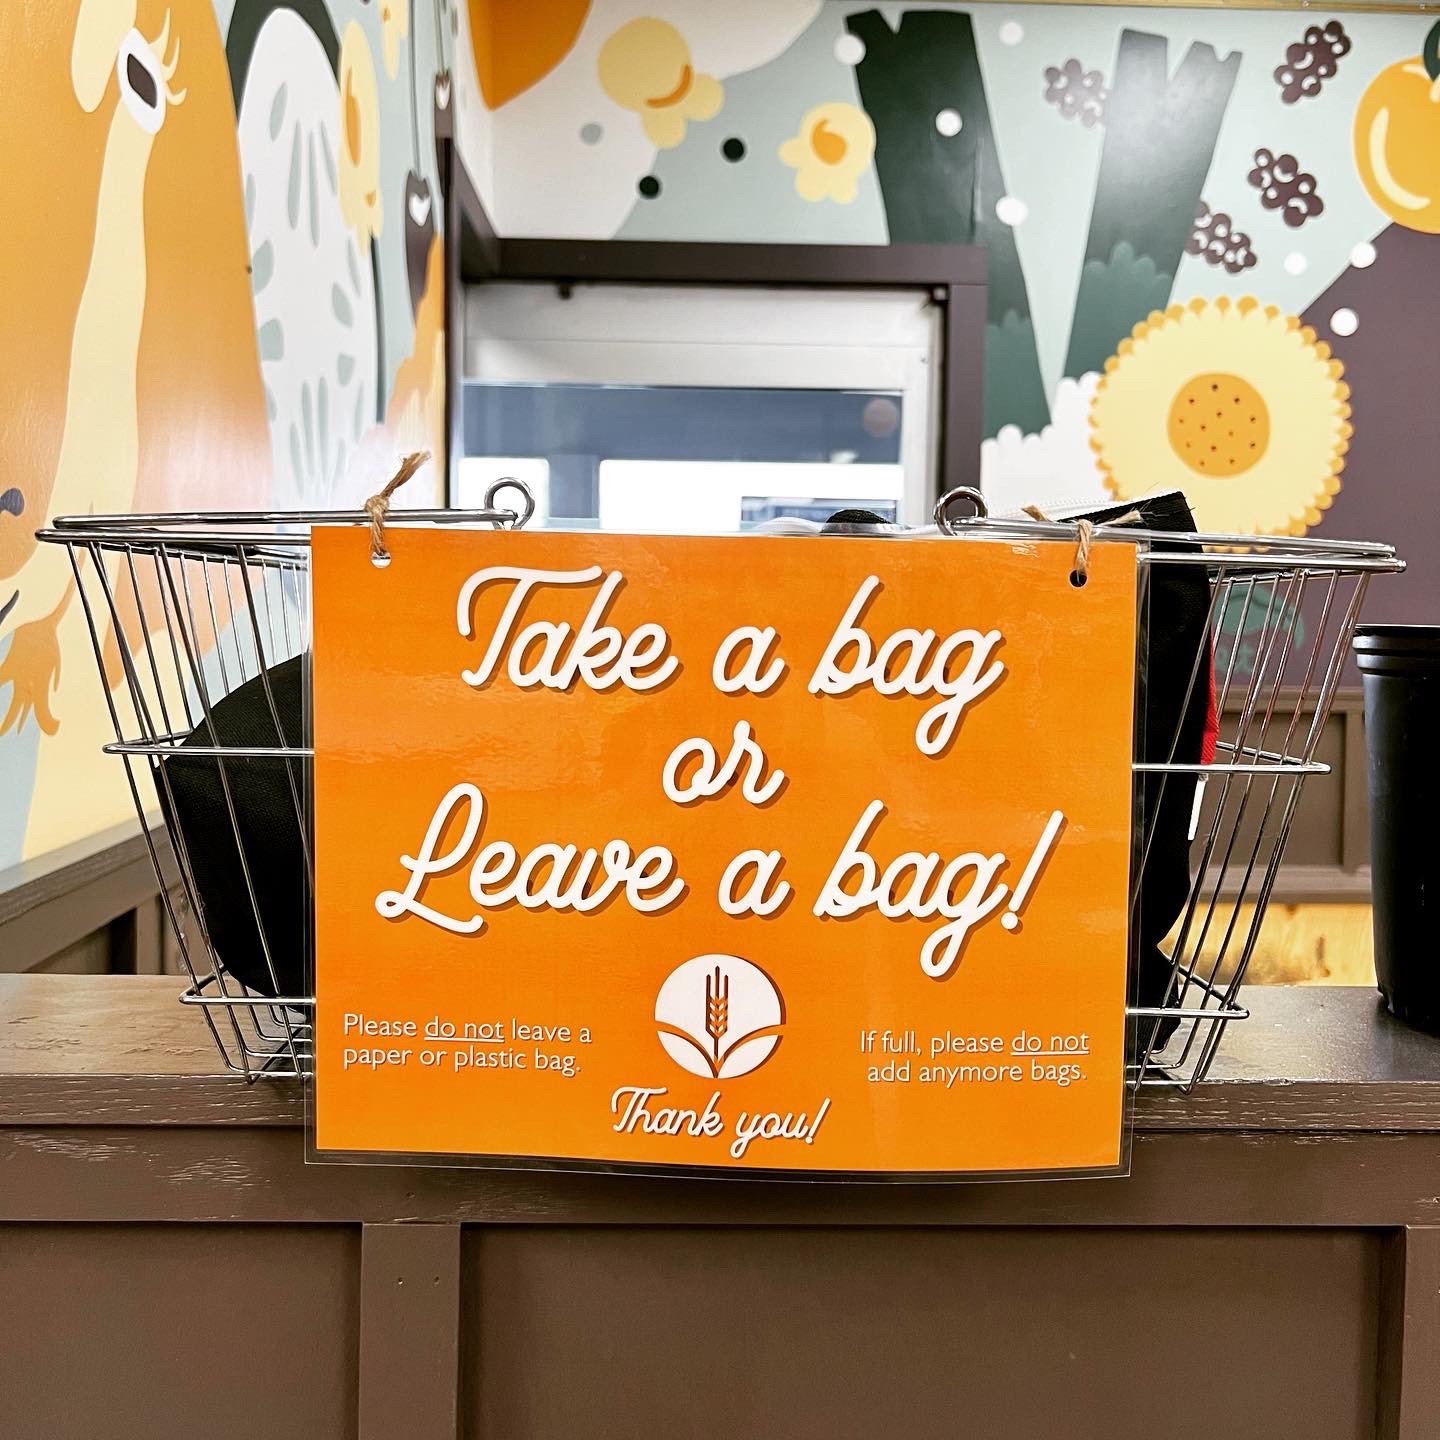 Bags Share at our East store